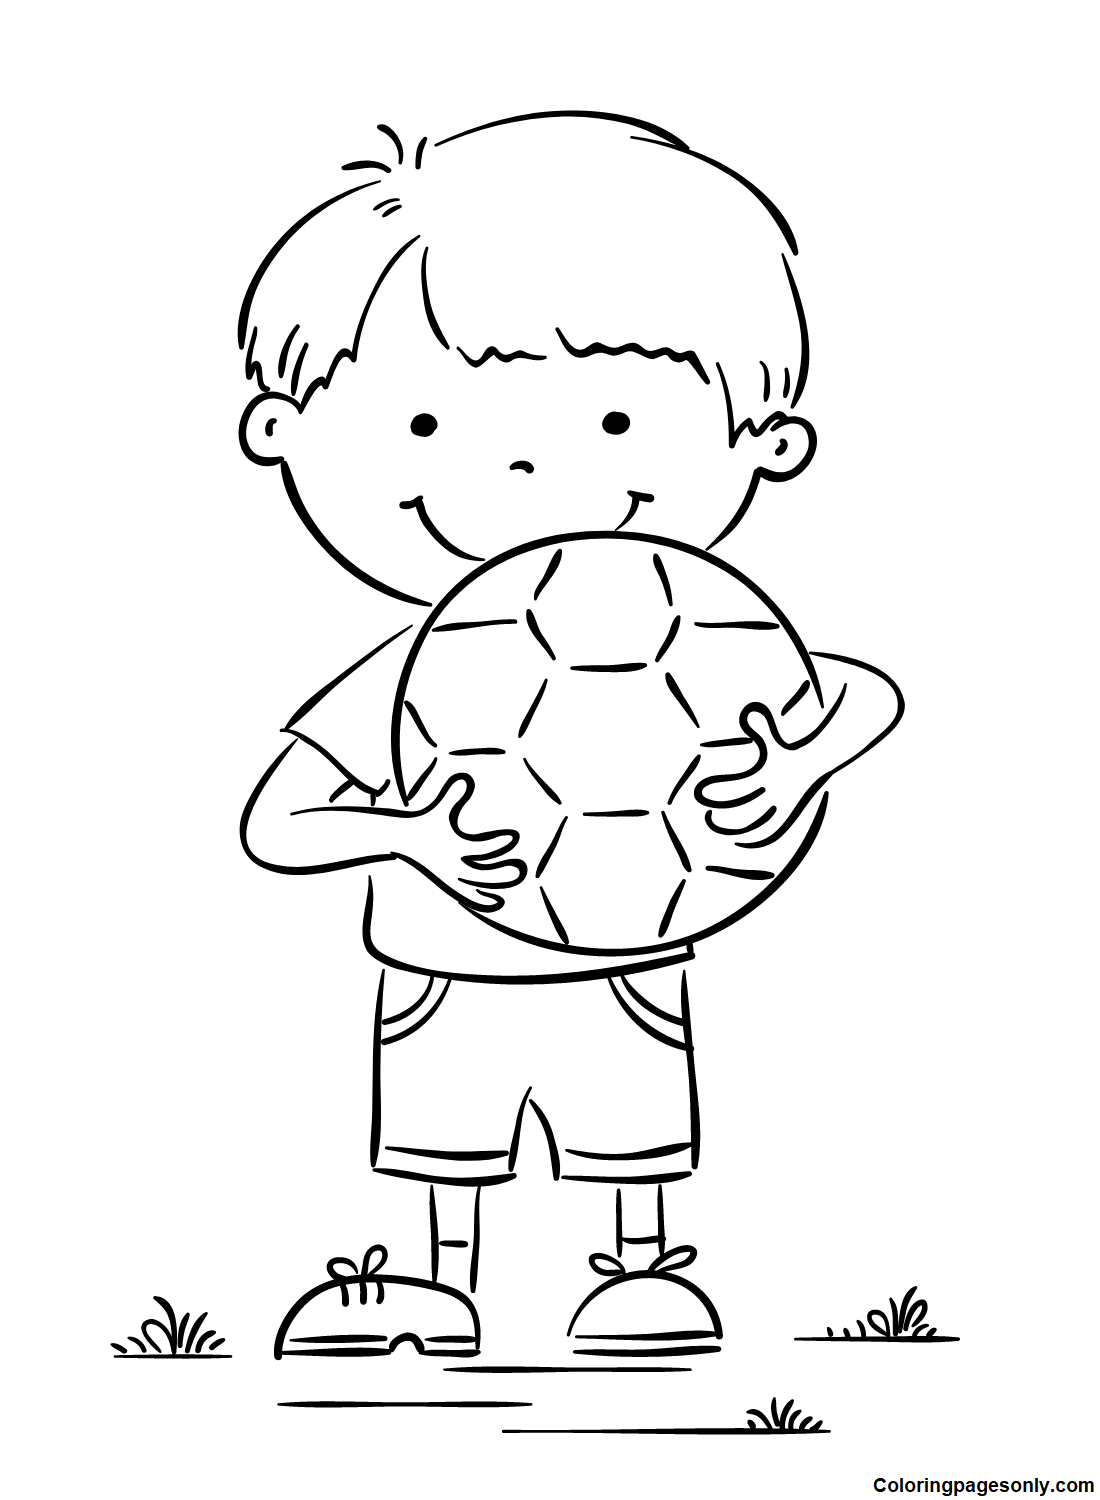 Little Boy with Football Ball Coloring Page